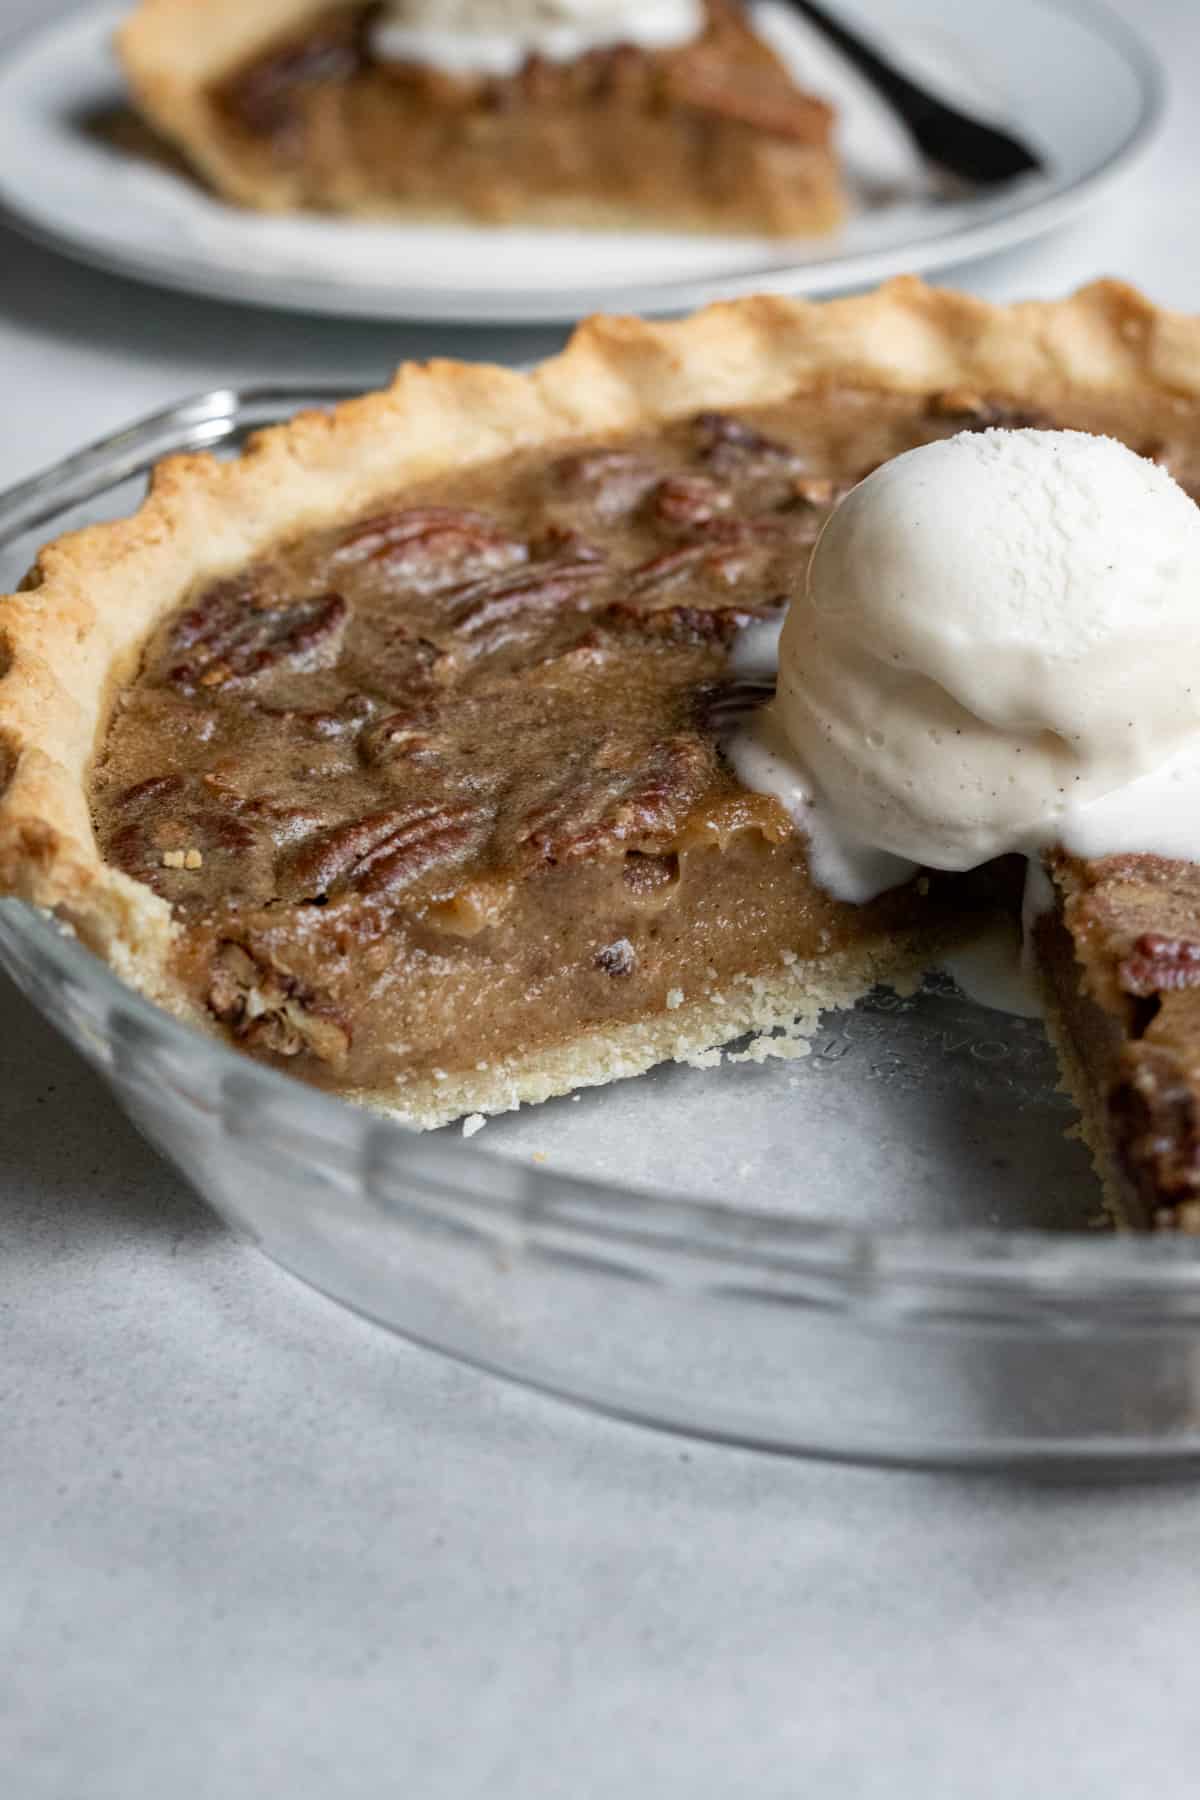 photo of pecan pie showing how edges and underside of crust look when baked.